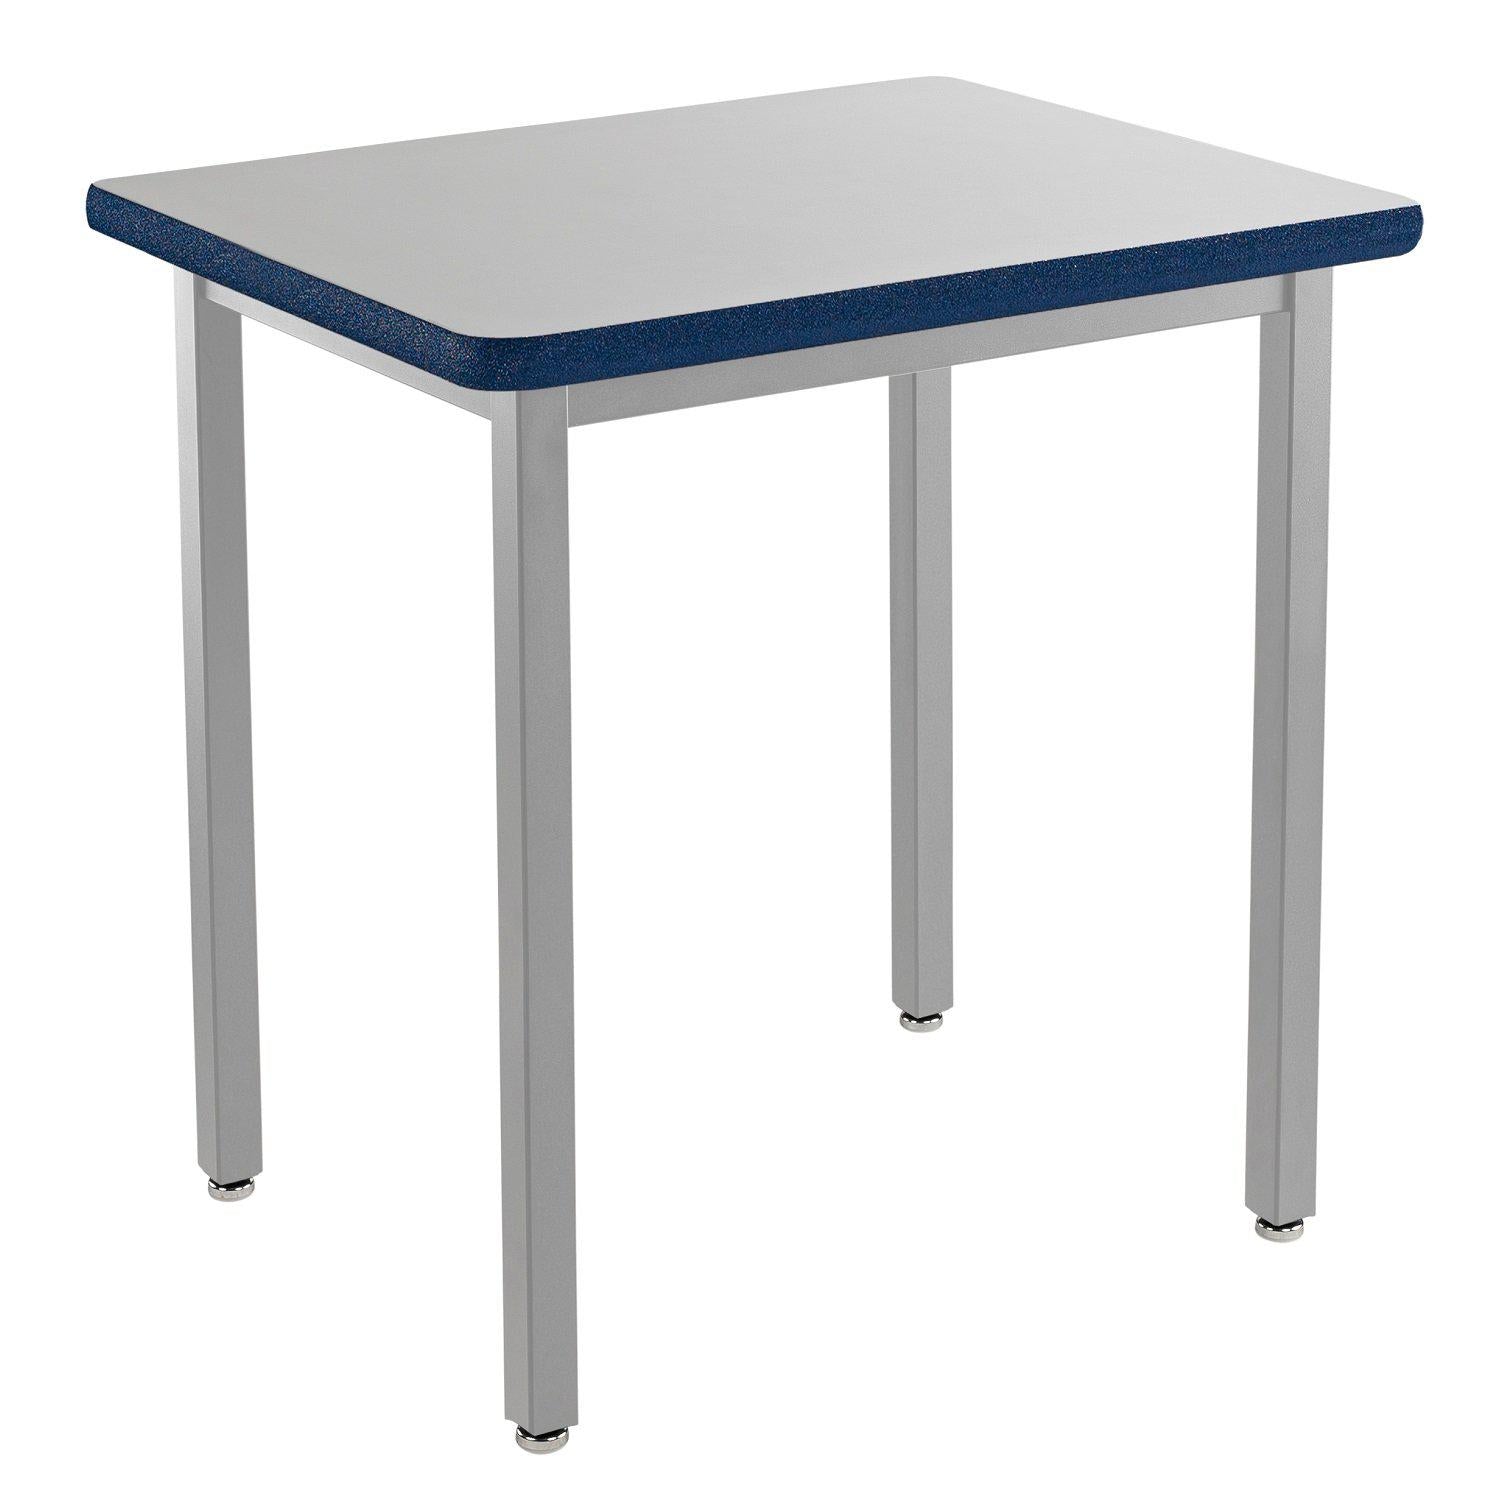 Heavy-Duty Fixed Height Utility Table, Soft Grey Frame, 30" x 36", Supreme High-Pressure Laminate Top with Black ProtectEdge